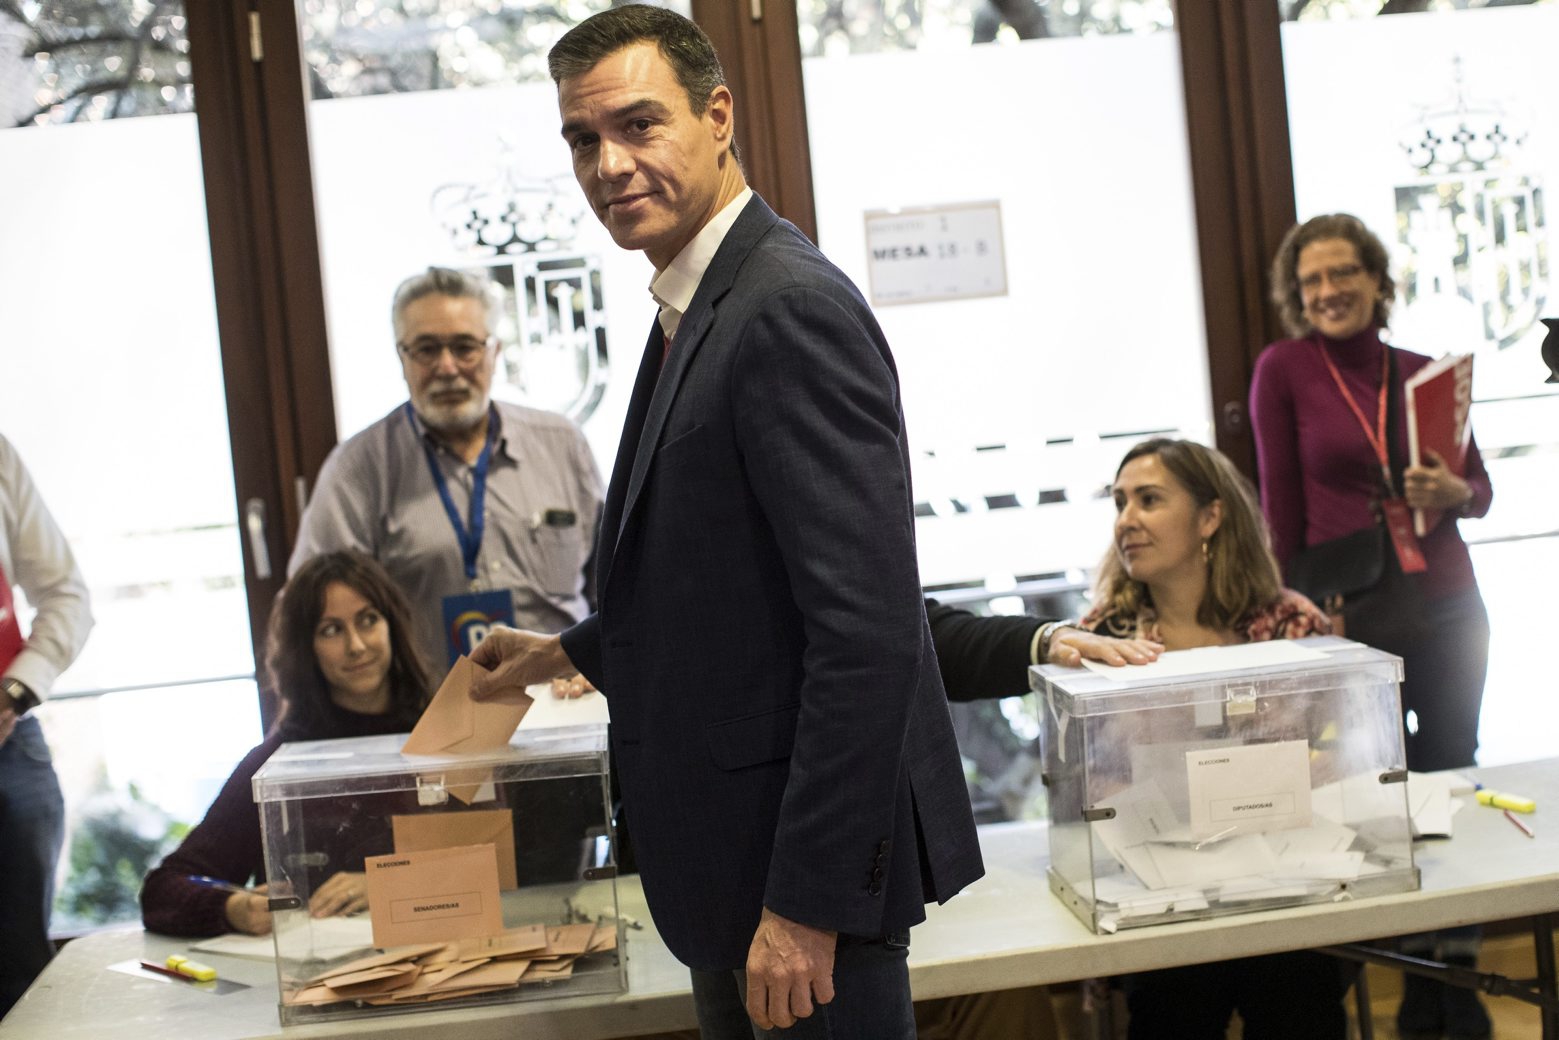 Spain's caretaker Prime Minister and socialist candidate Pedro Sanchez casts his vote for the general election in Pozuelo de Alarcon, outskirts of Madrid, Spain, Sunday, Nov.10, 2019. Spain holds its second national election this year after Socialist leader Pedro Sanchez failed to win support for his government in a fractured Parliament. (AP Photo/Bernat Armangue) Spain Election